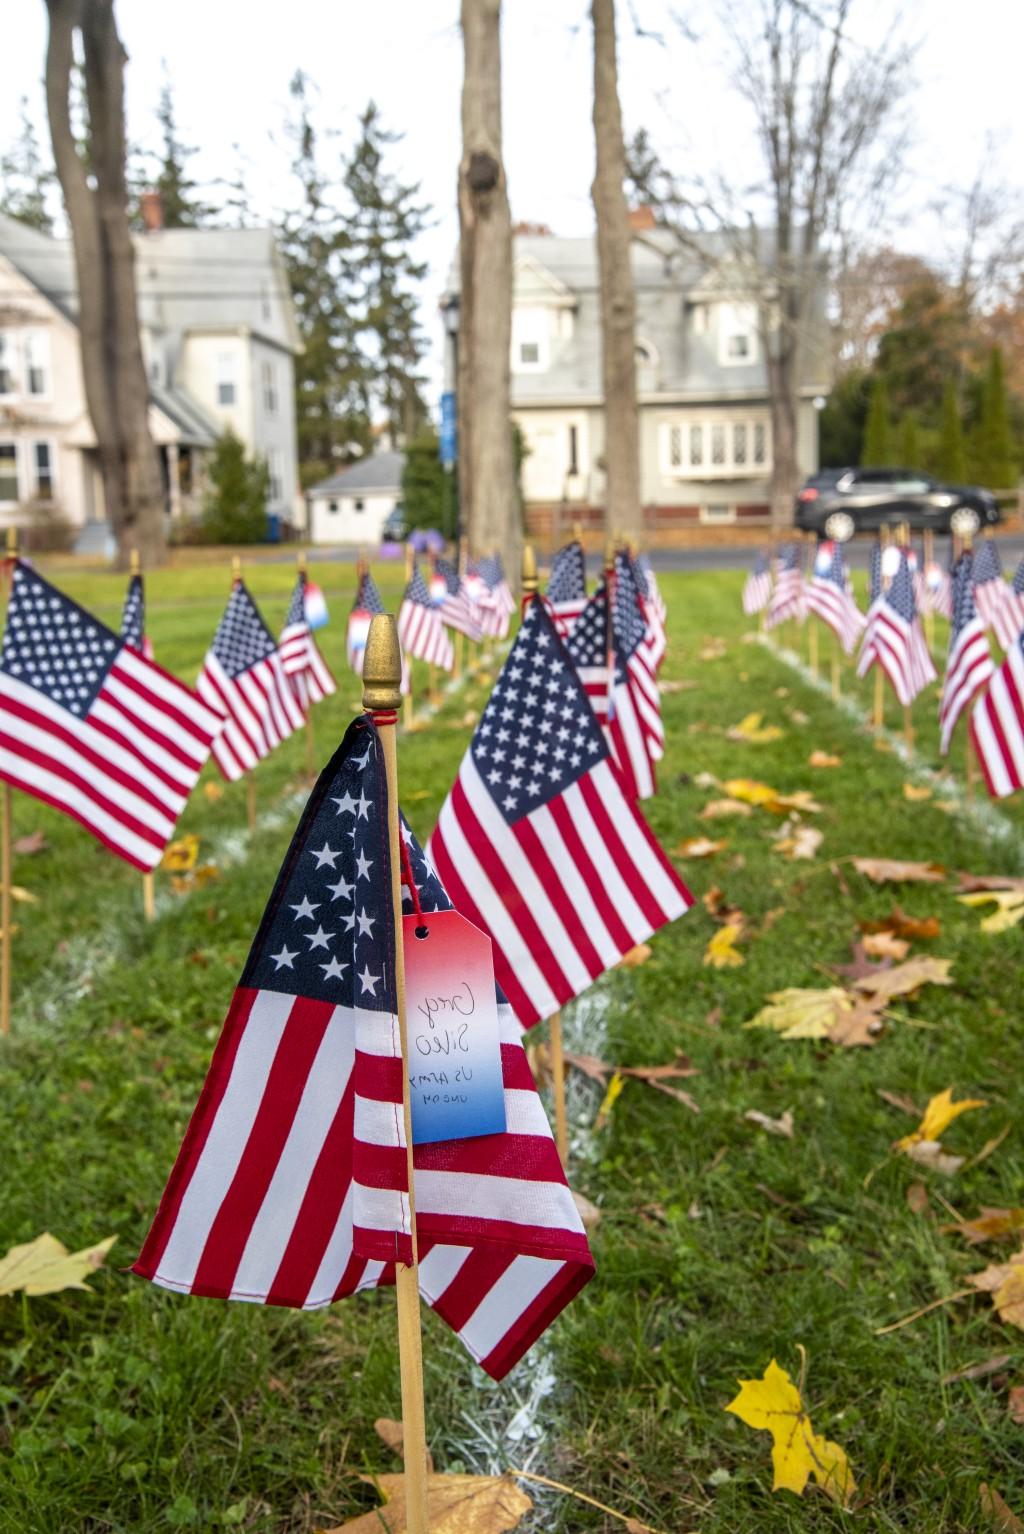 Small American flags are planted in rows on UNE's campus green in Portland in honors of Veterans Day